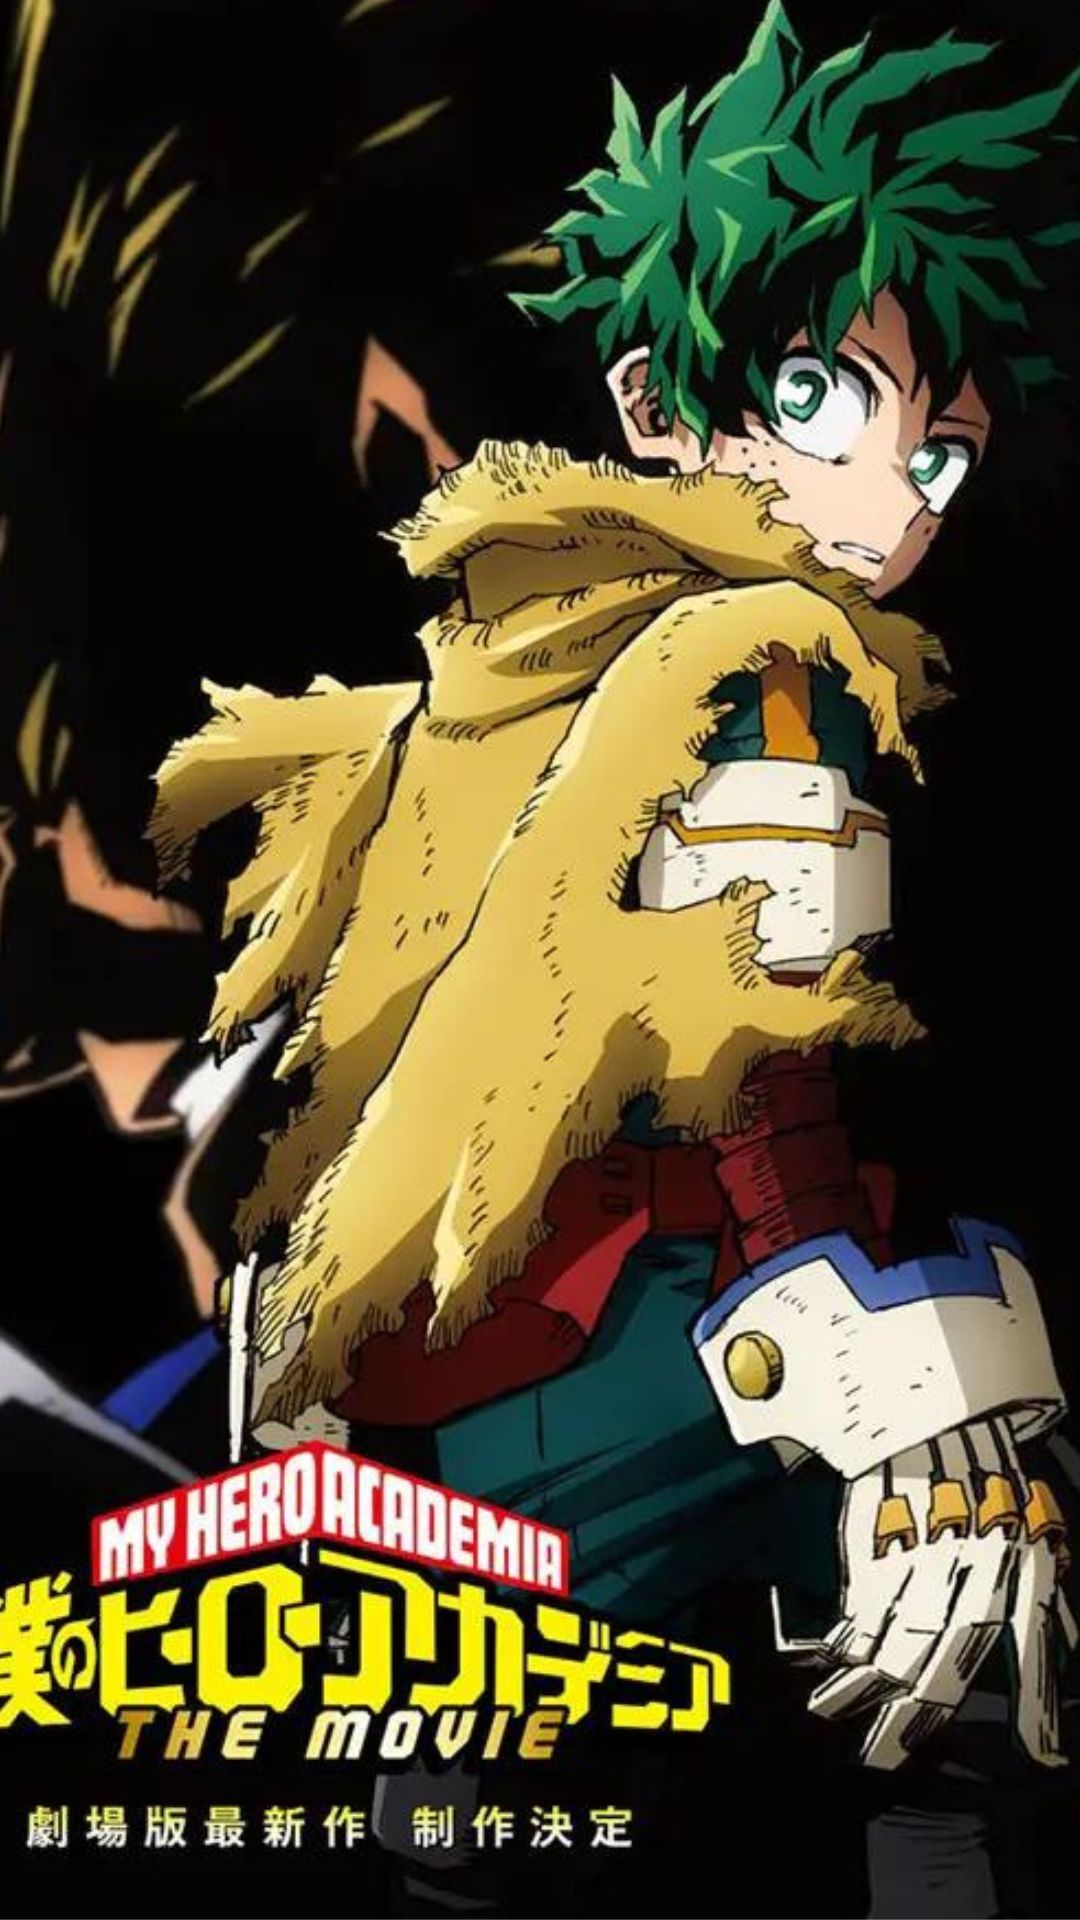 My Hero Academia Movie 4 - Release Date, Plot, and Excitement!